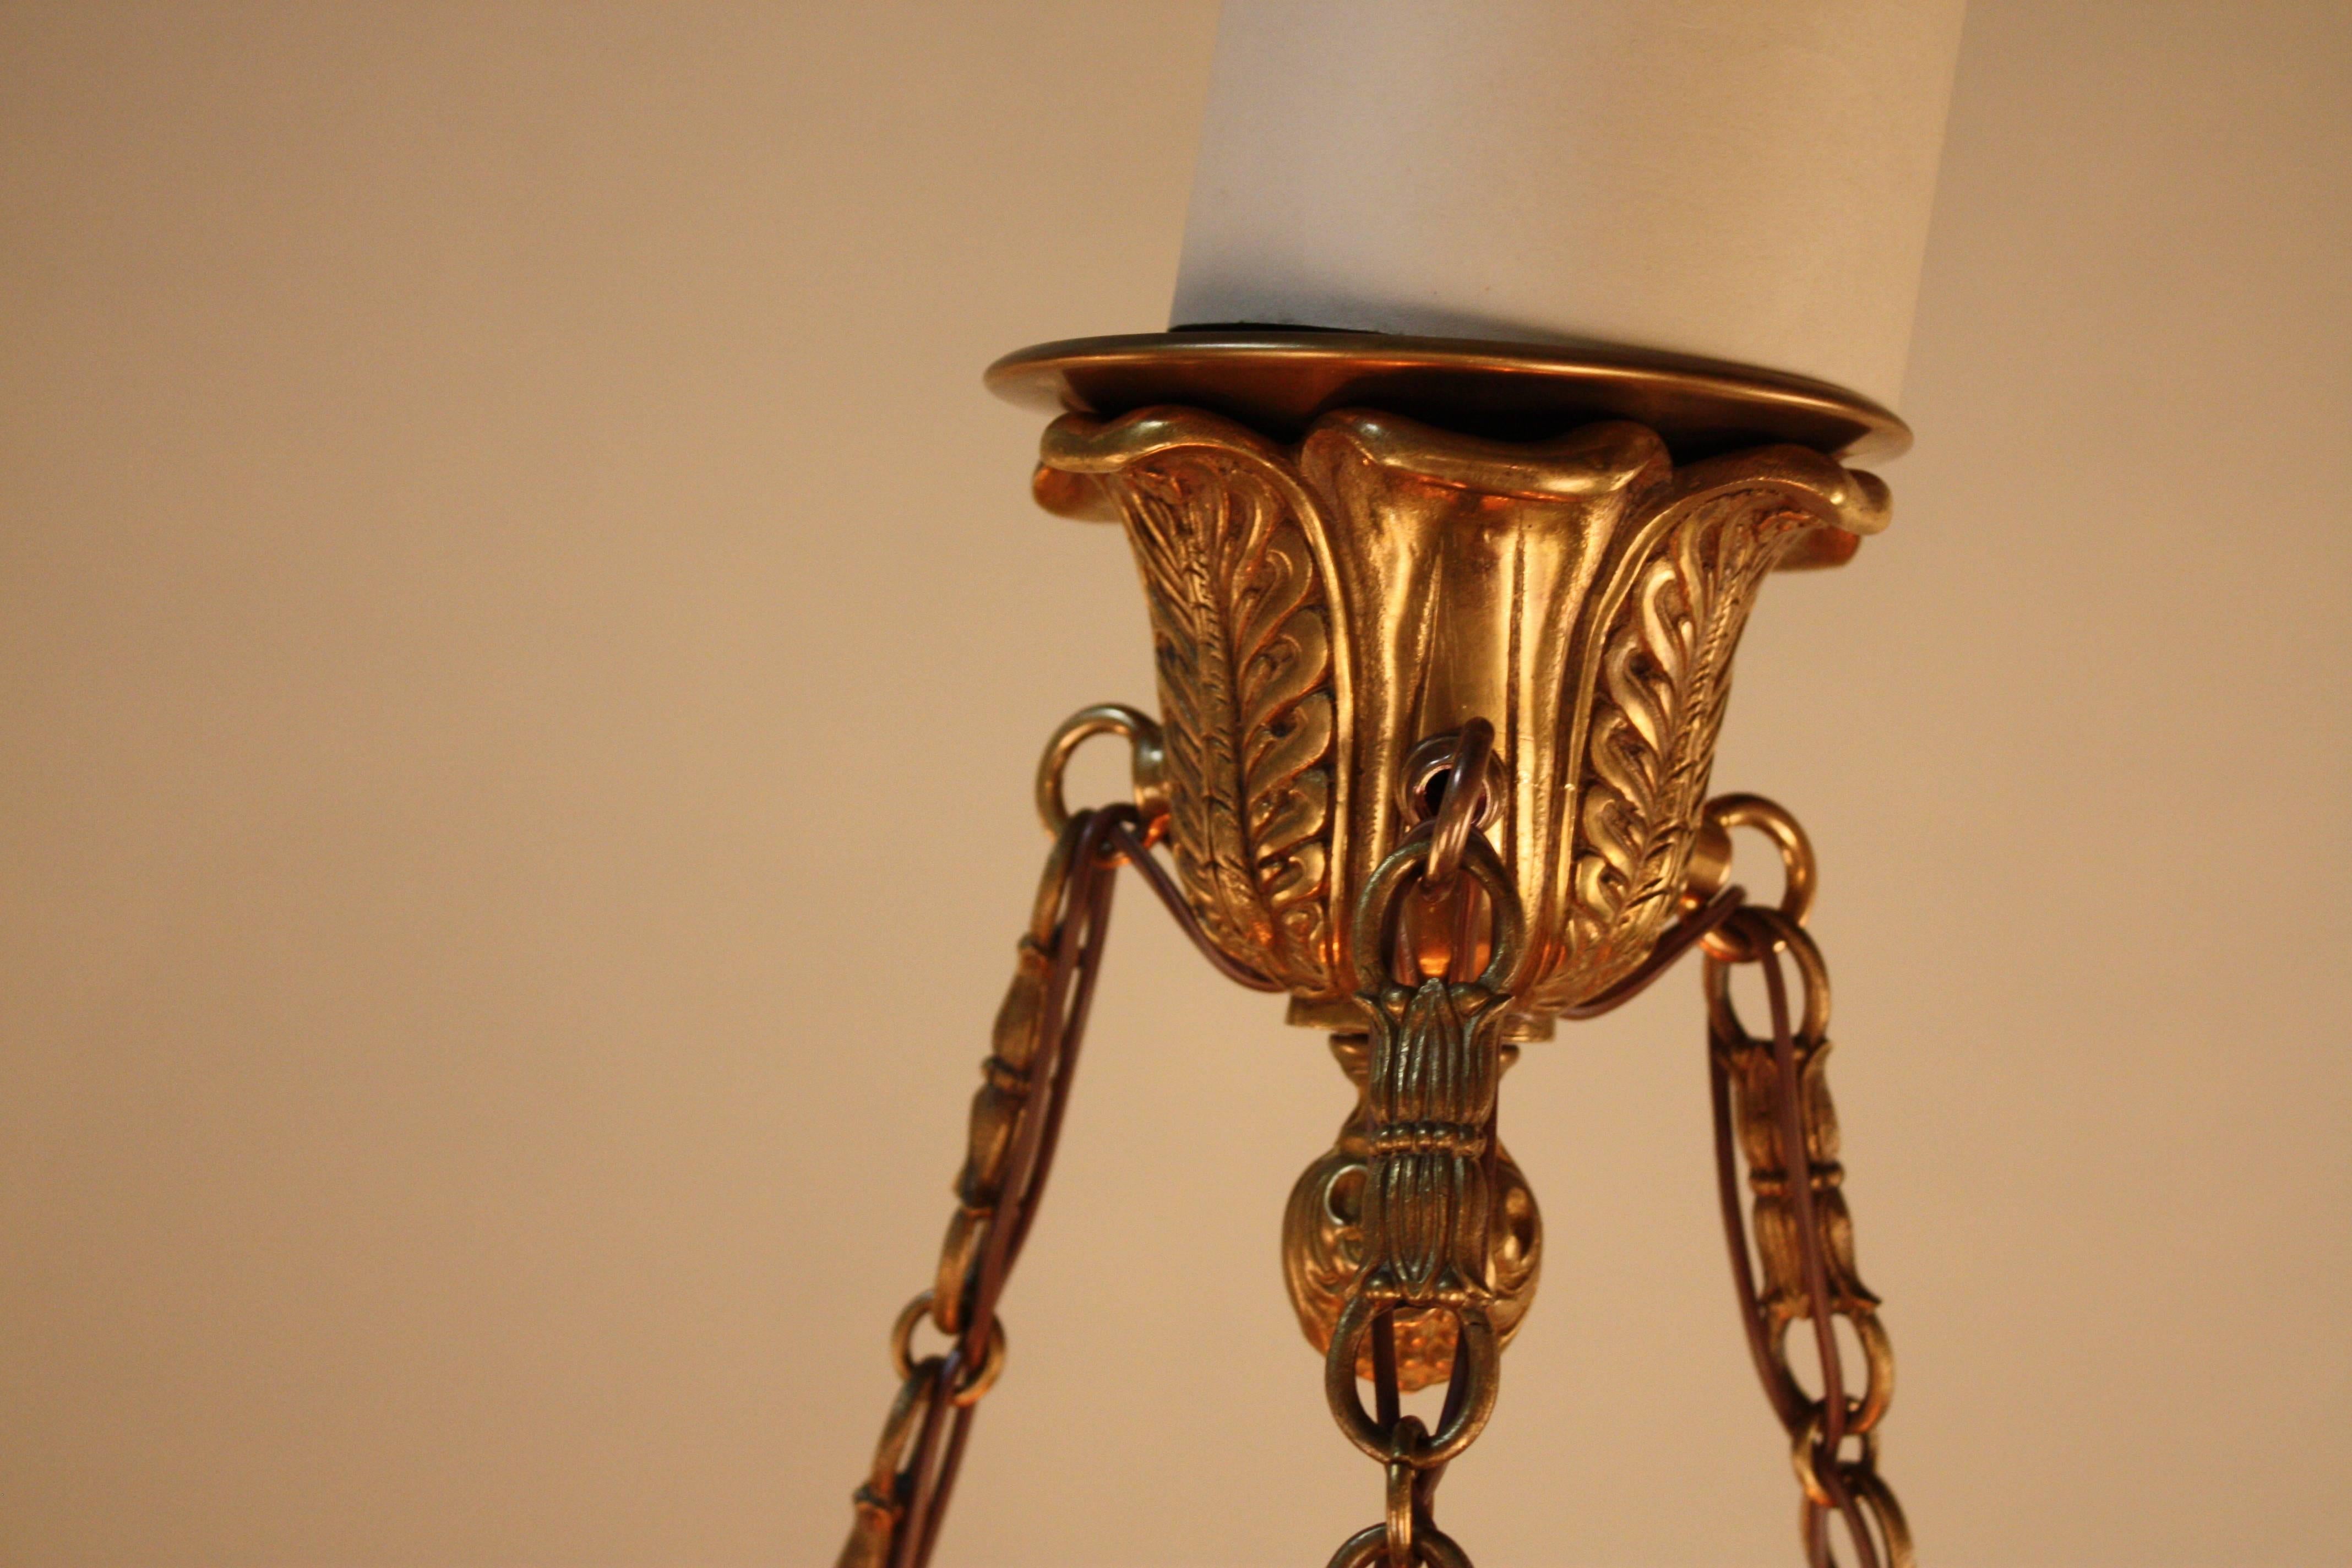 Early 20th Century French Handblown Glass Pendant Chandelier by Charles Schneider